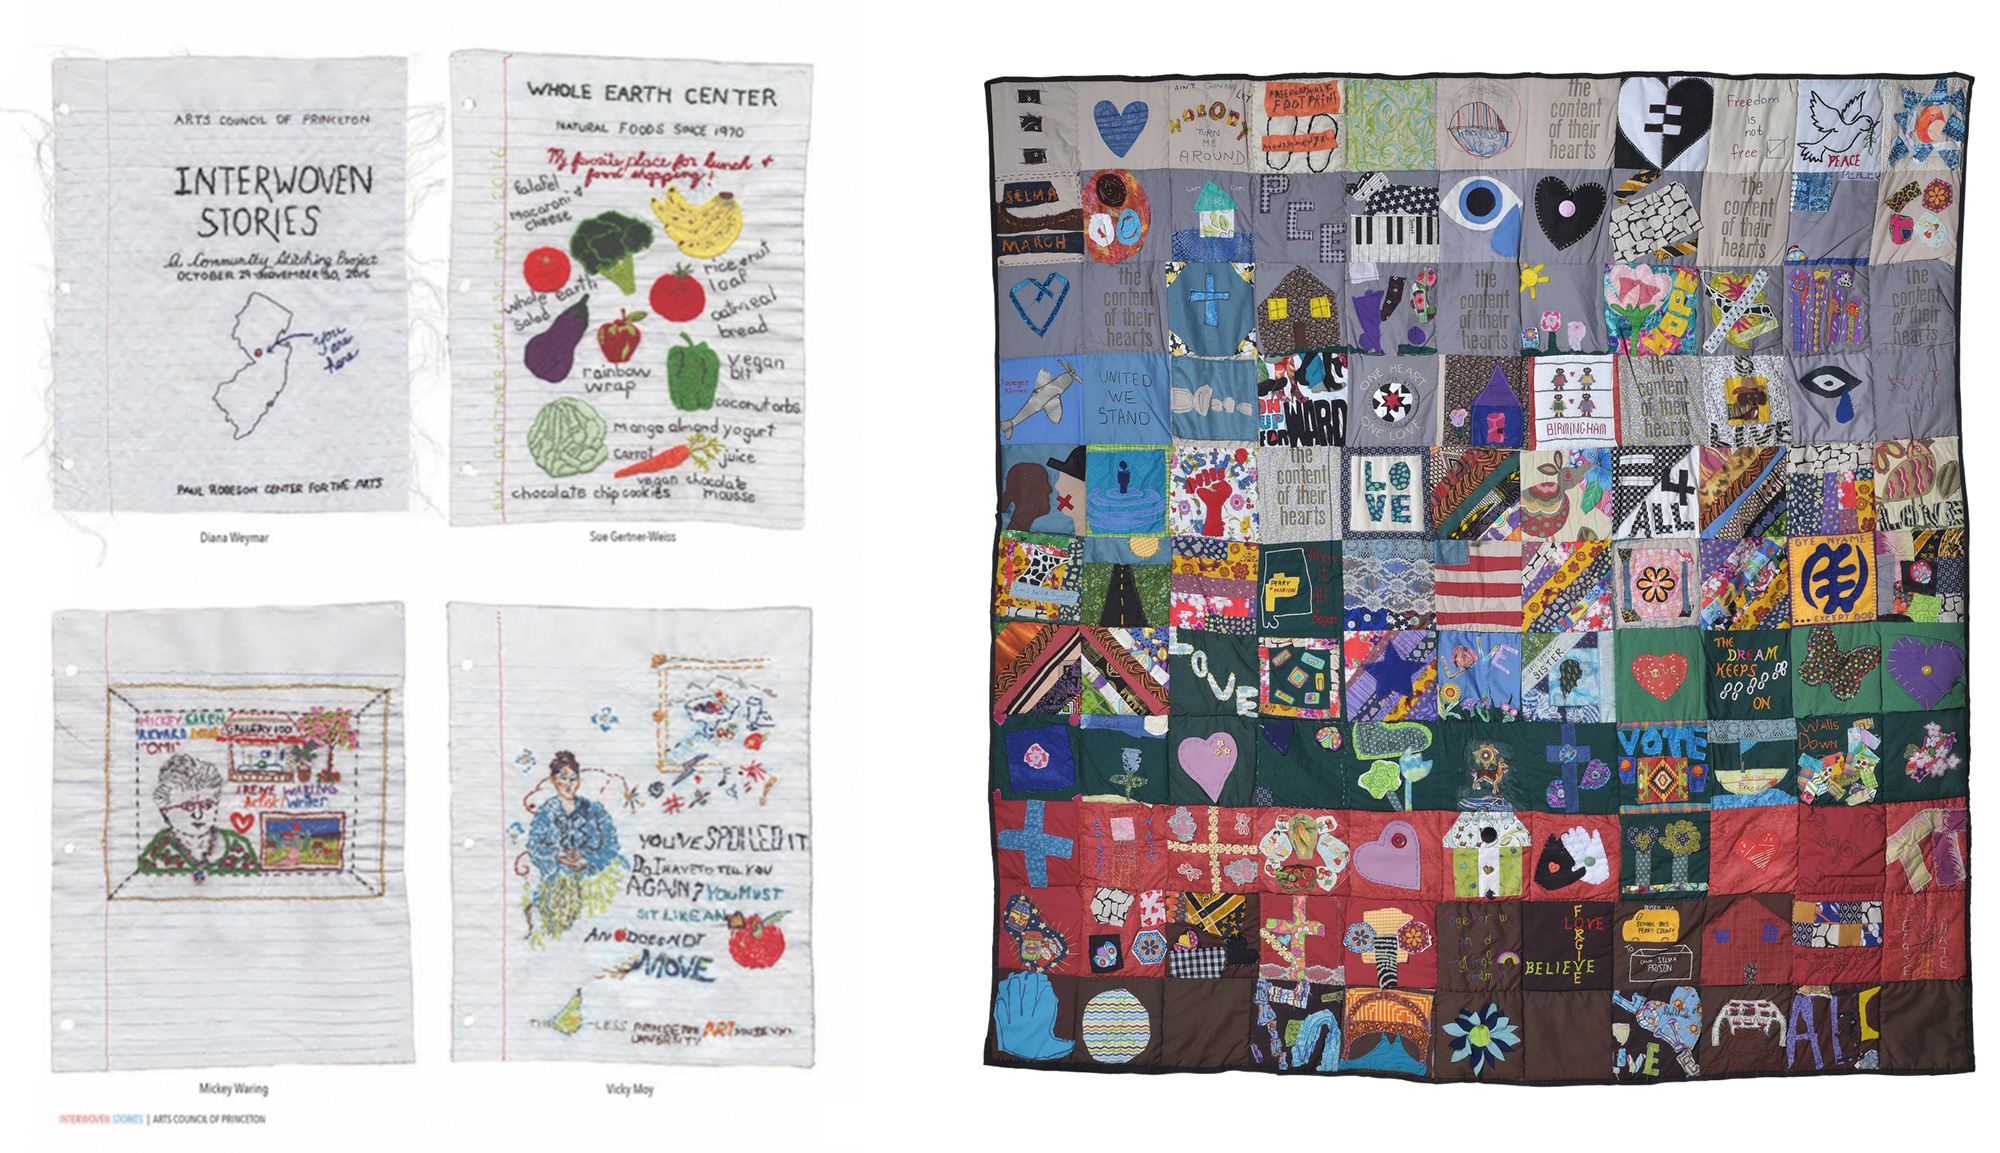 Various fabric pieces that look like pages with hand-stitched designs on them; a March Quilt from Bib and Tucker Sew-Op in Birmingham, Alabama.